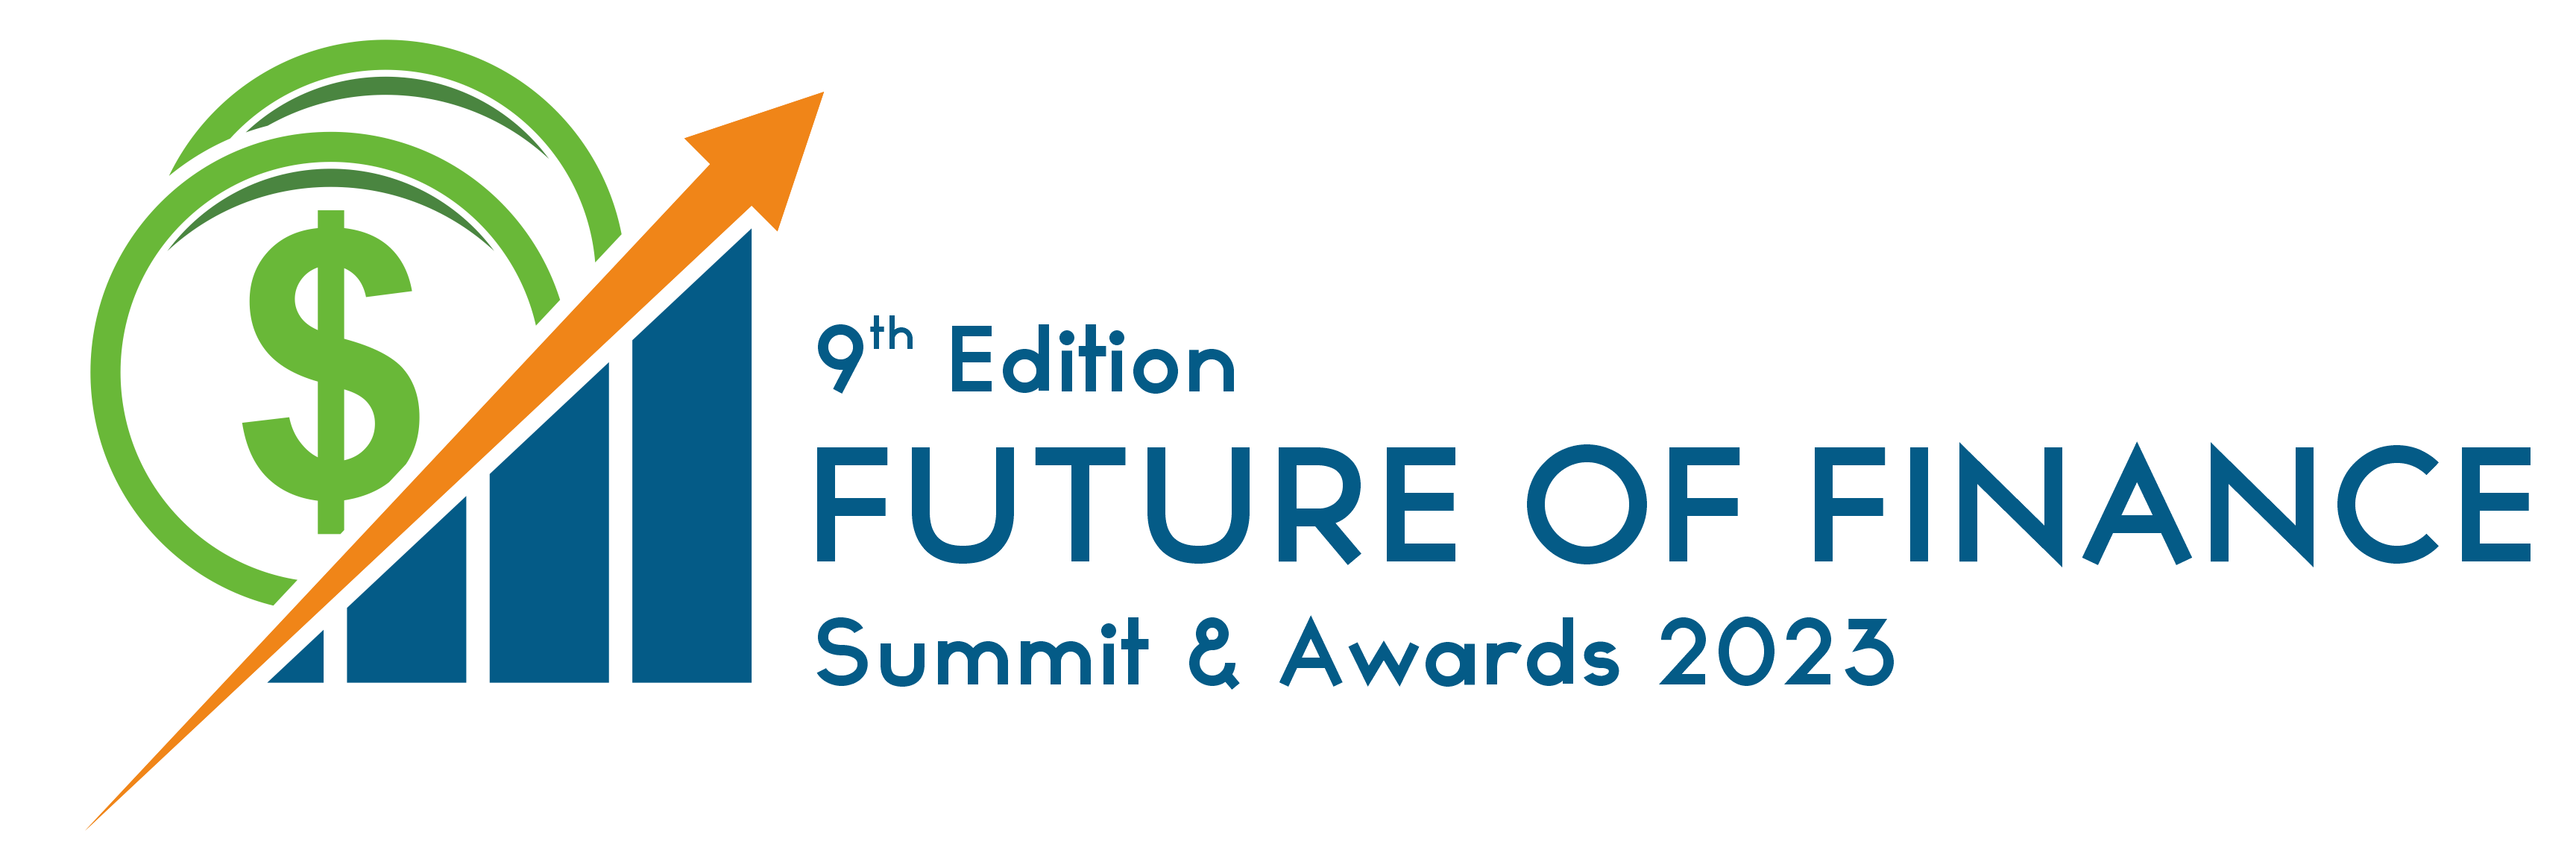 9th Edition future of finance Summit and Awards 2023